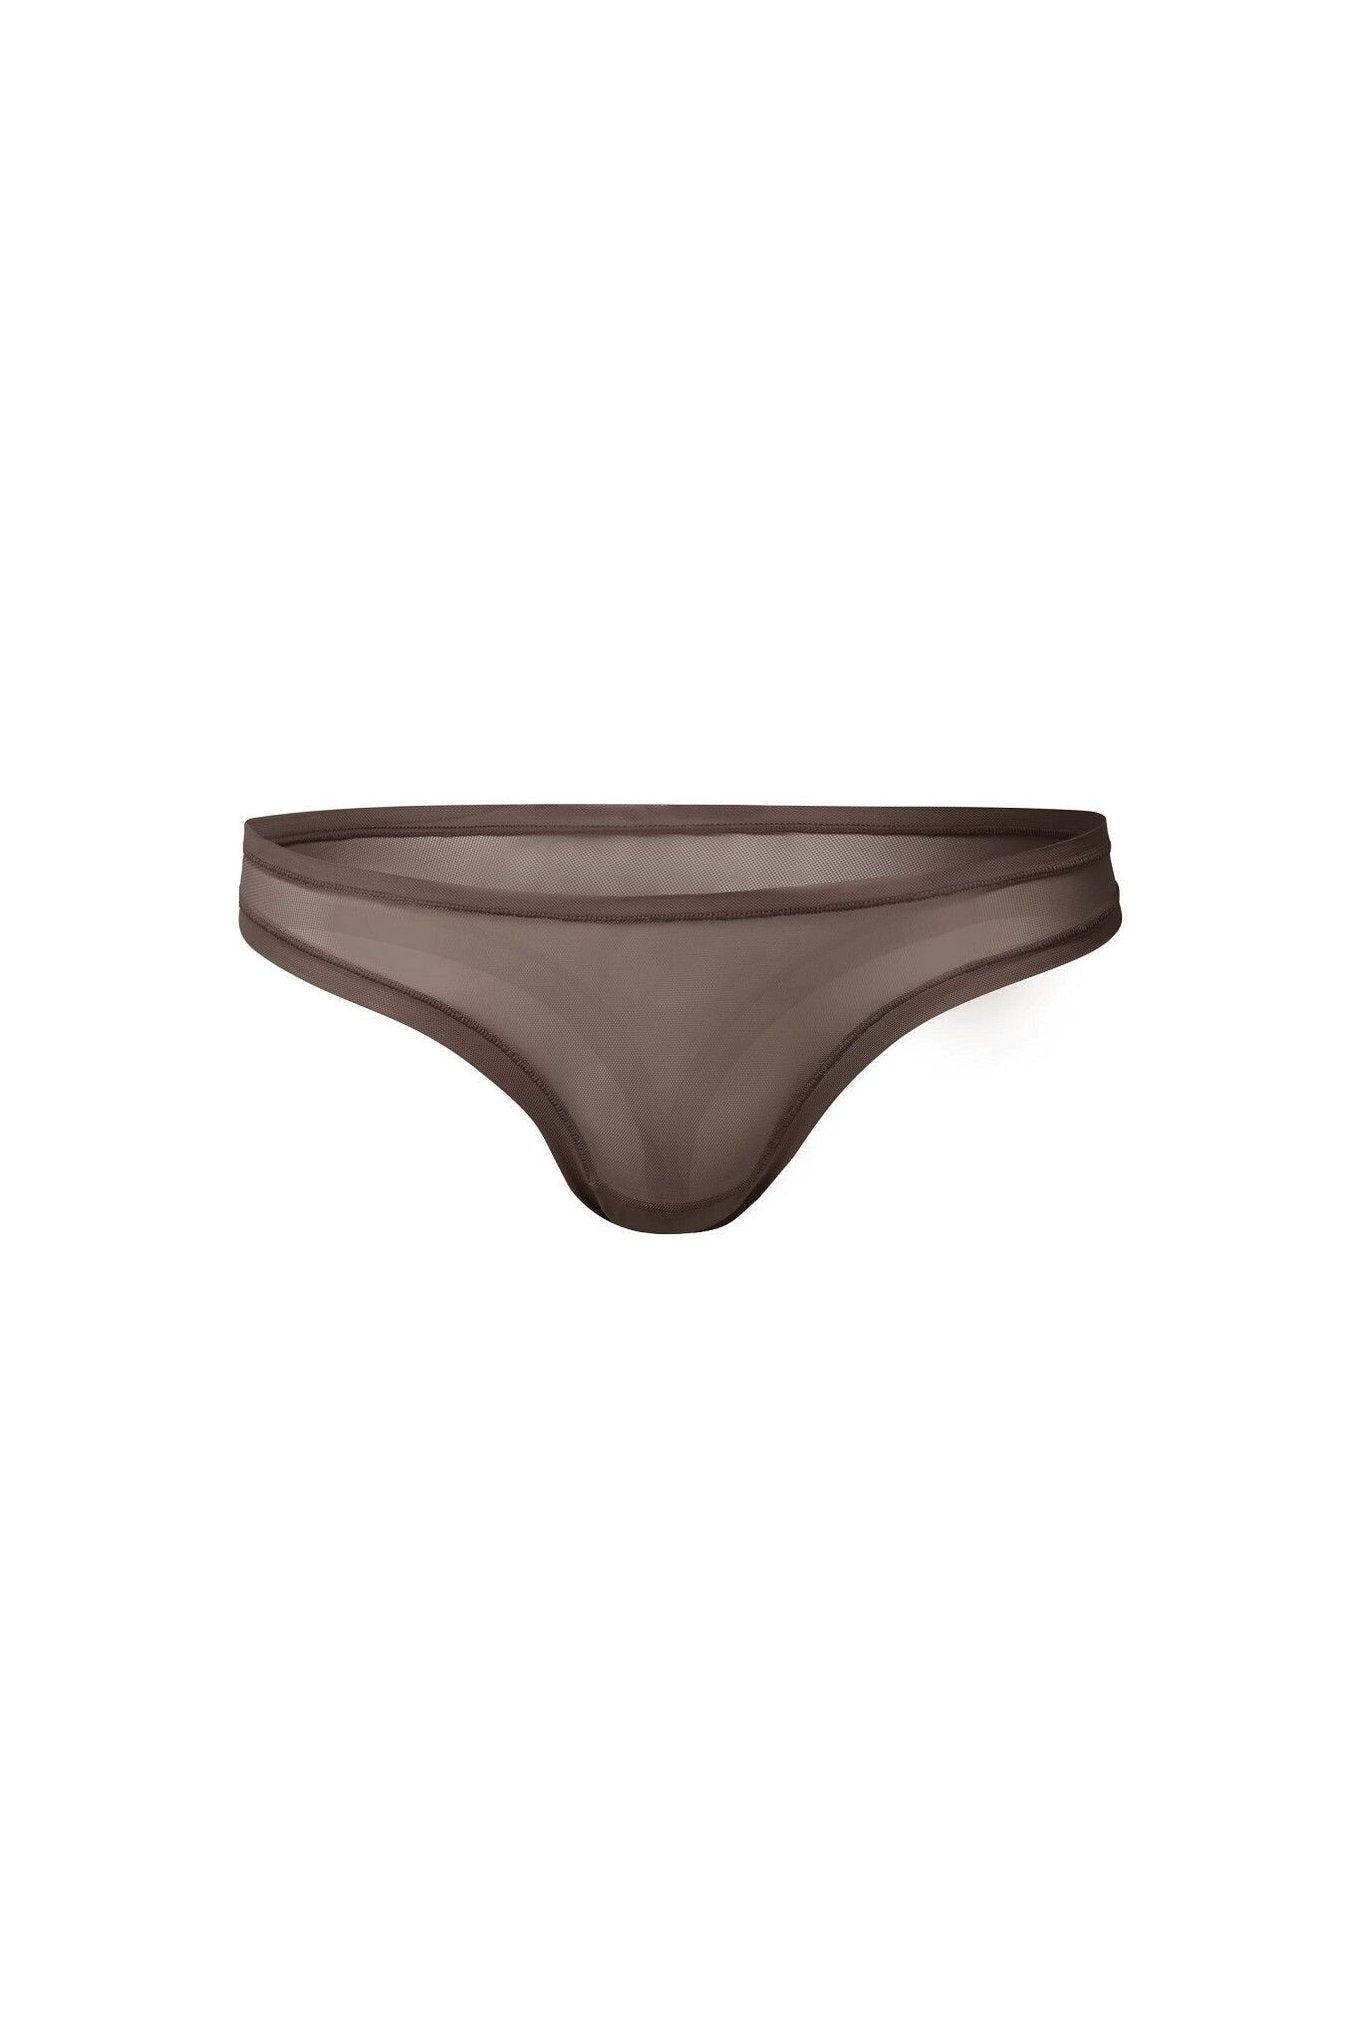 nueskin Bonnie Mesh Low-Rise Thong in color Bracken and shape thong